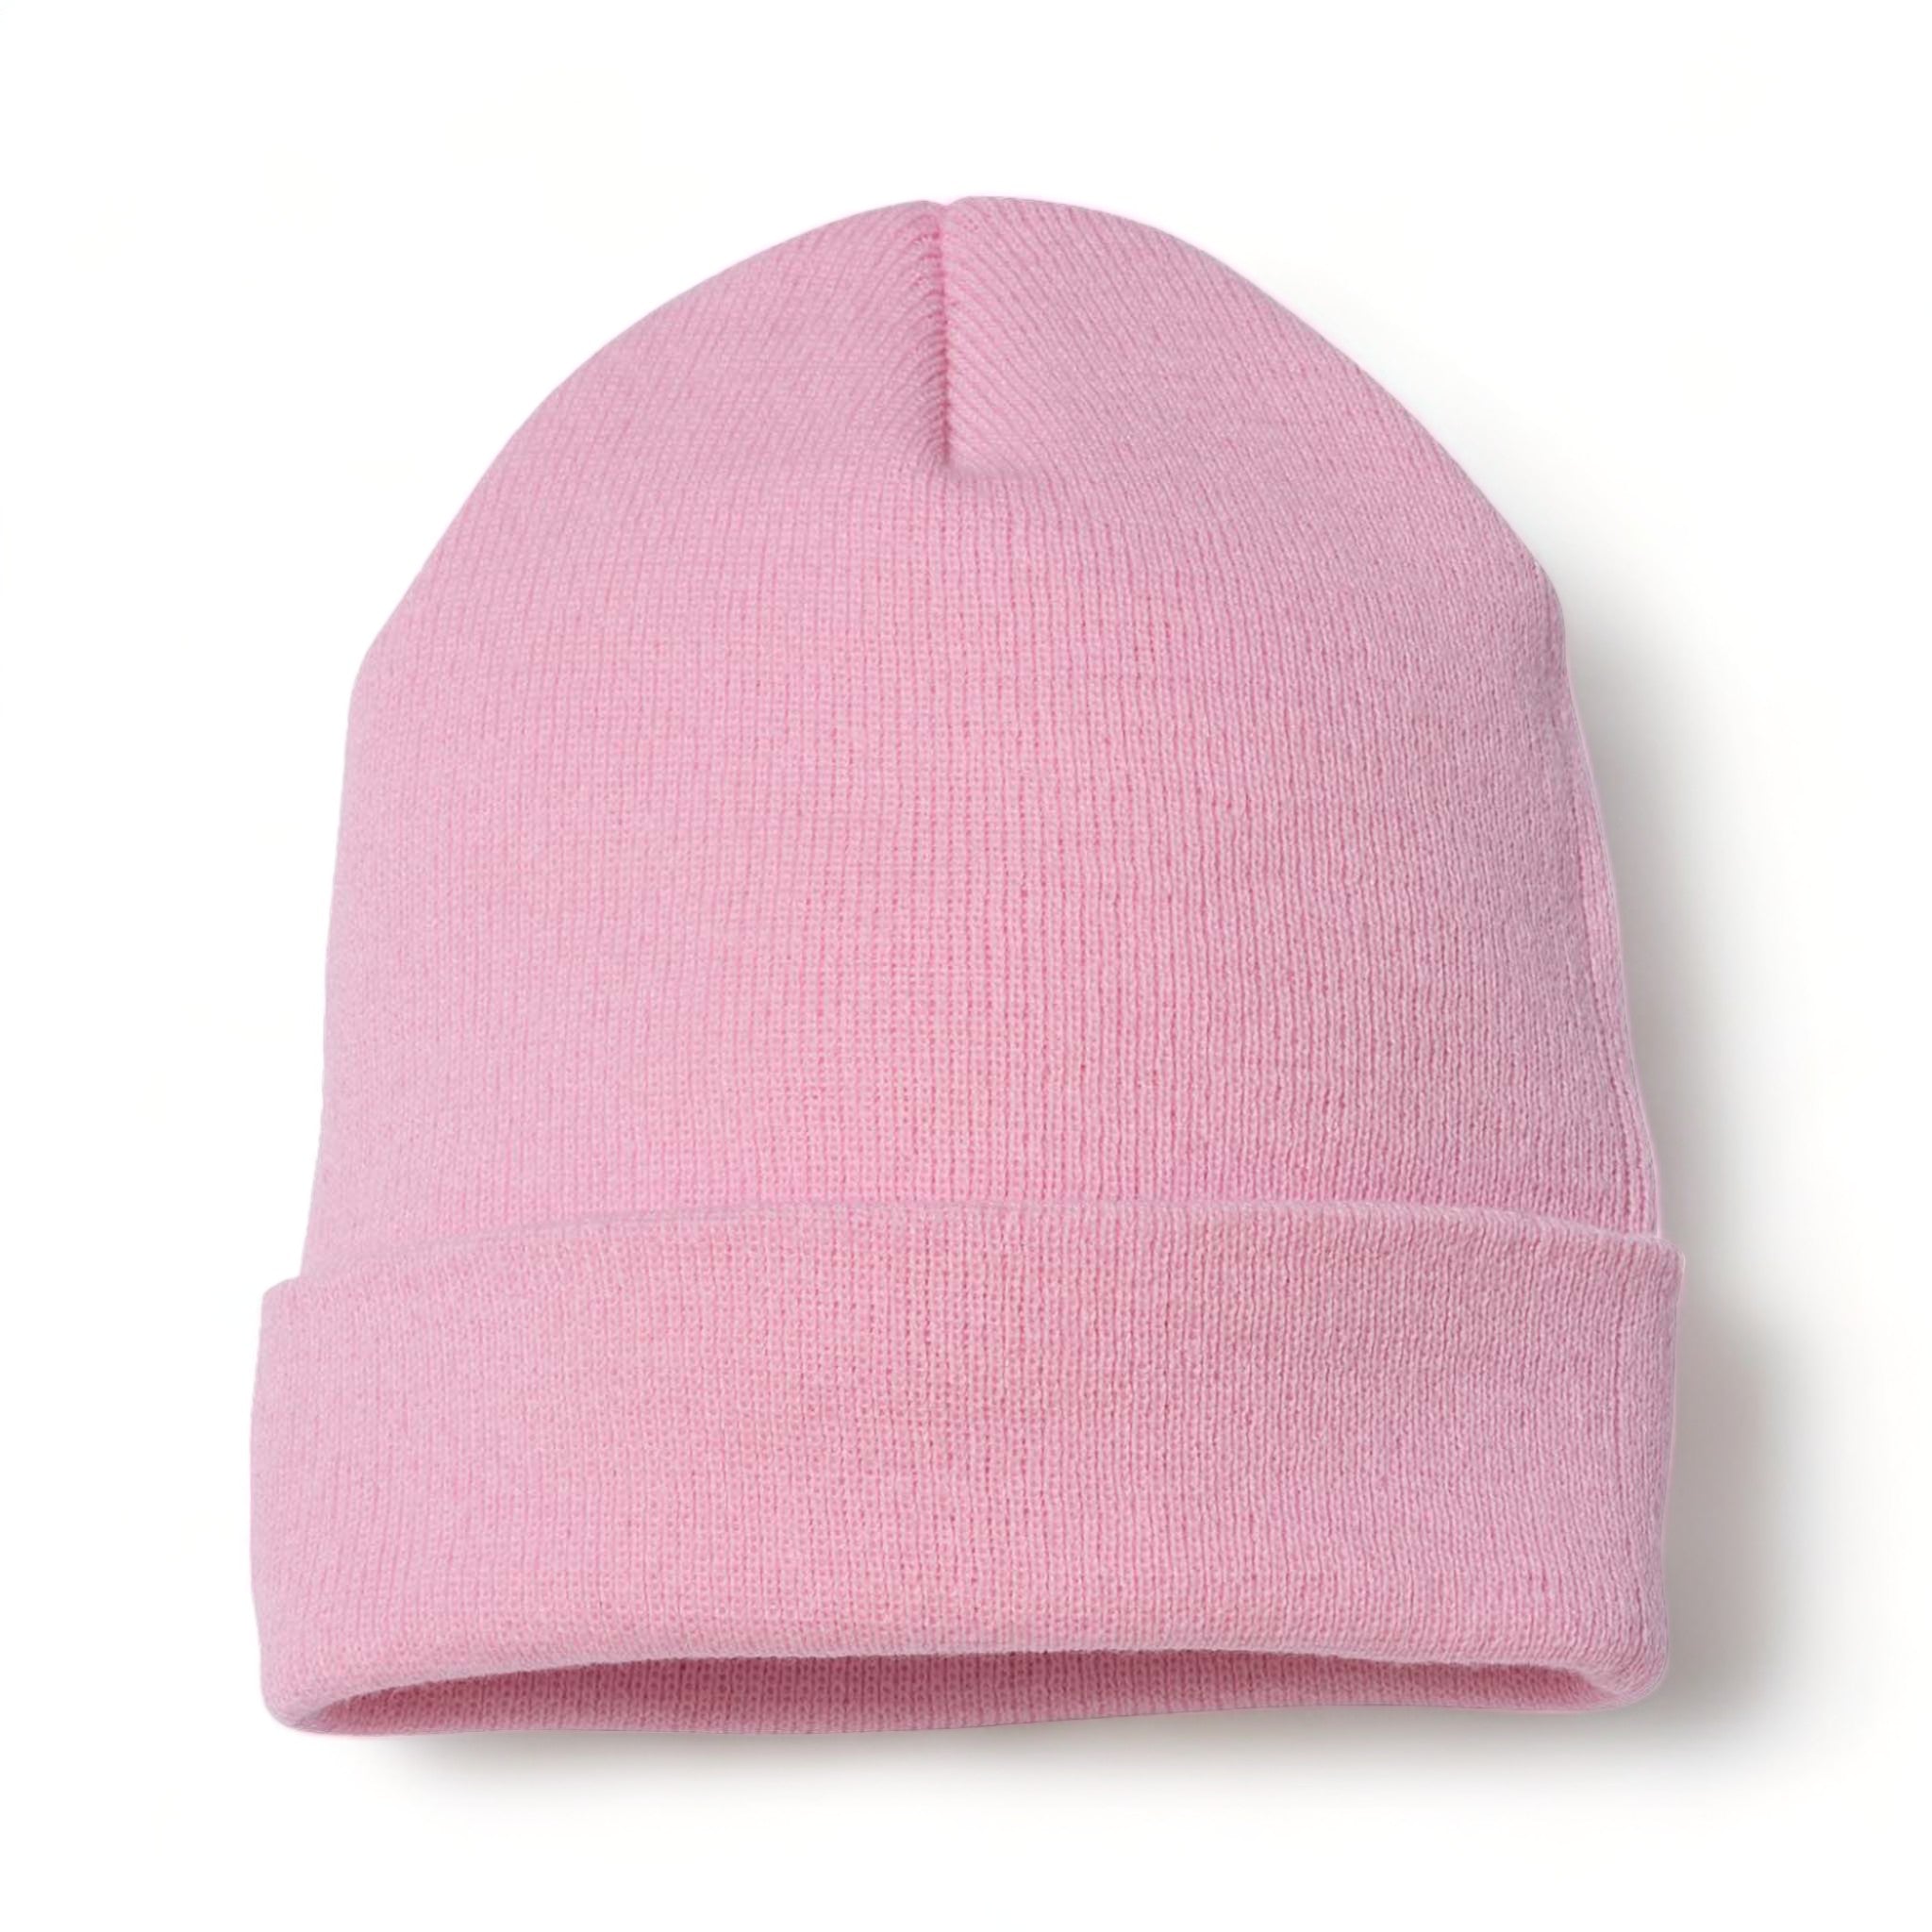 YP Classics 1501KC custom beanie in baby pink